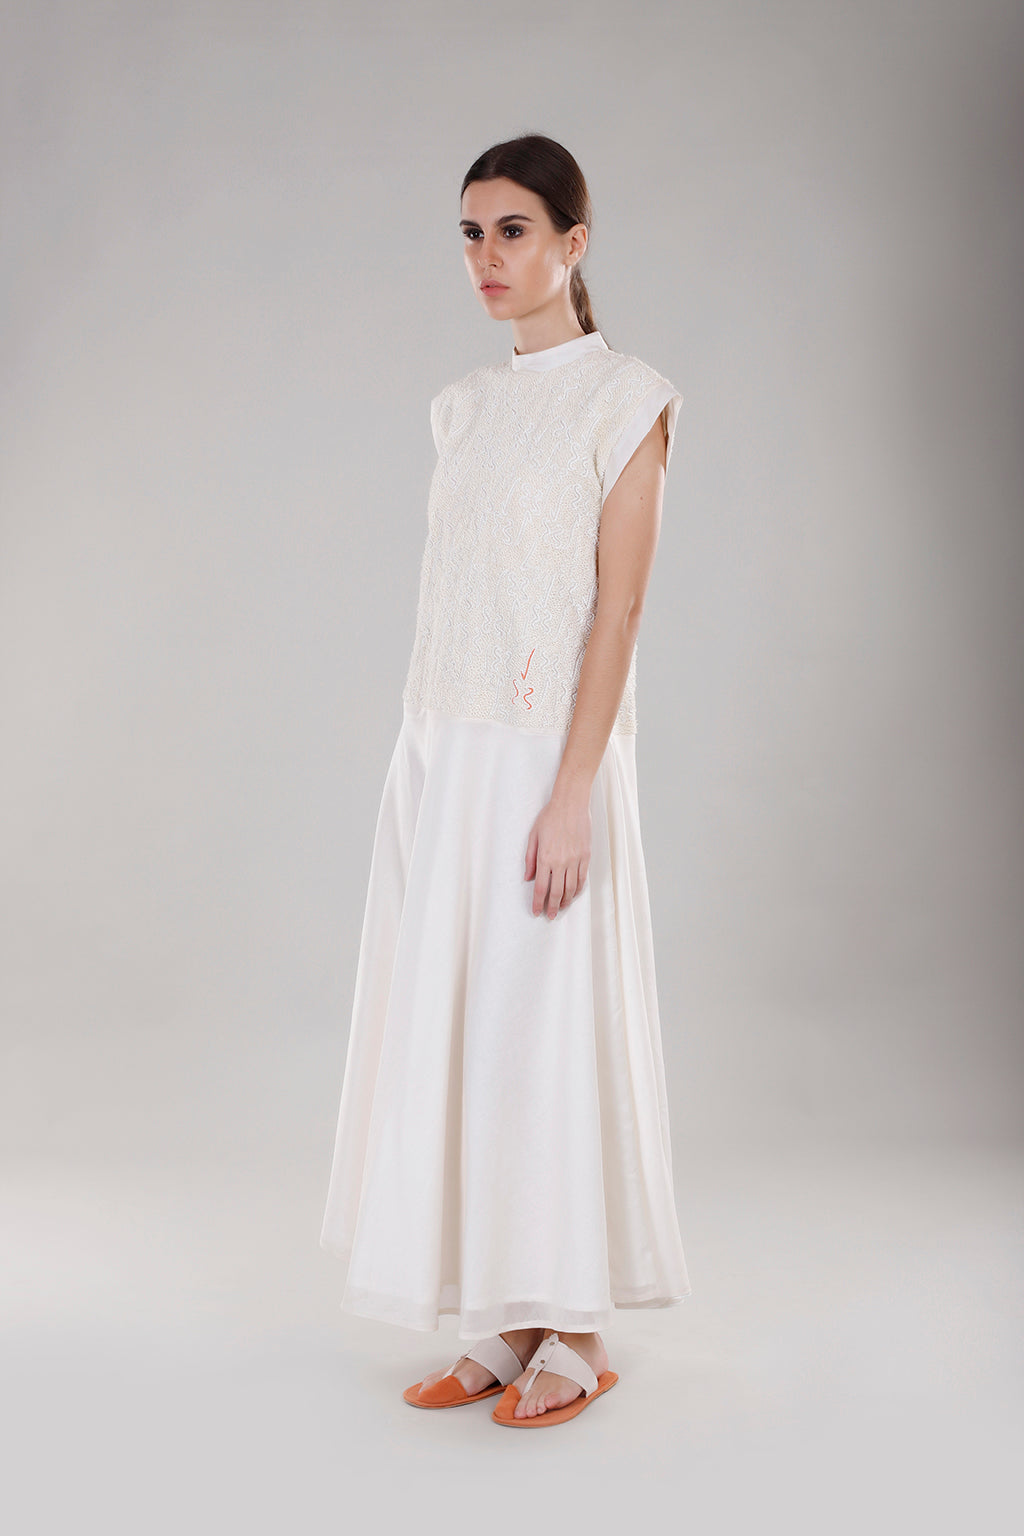 Hand Embroidered High Neck Dress - Dhi